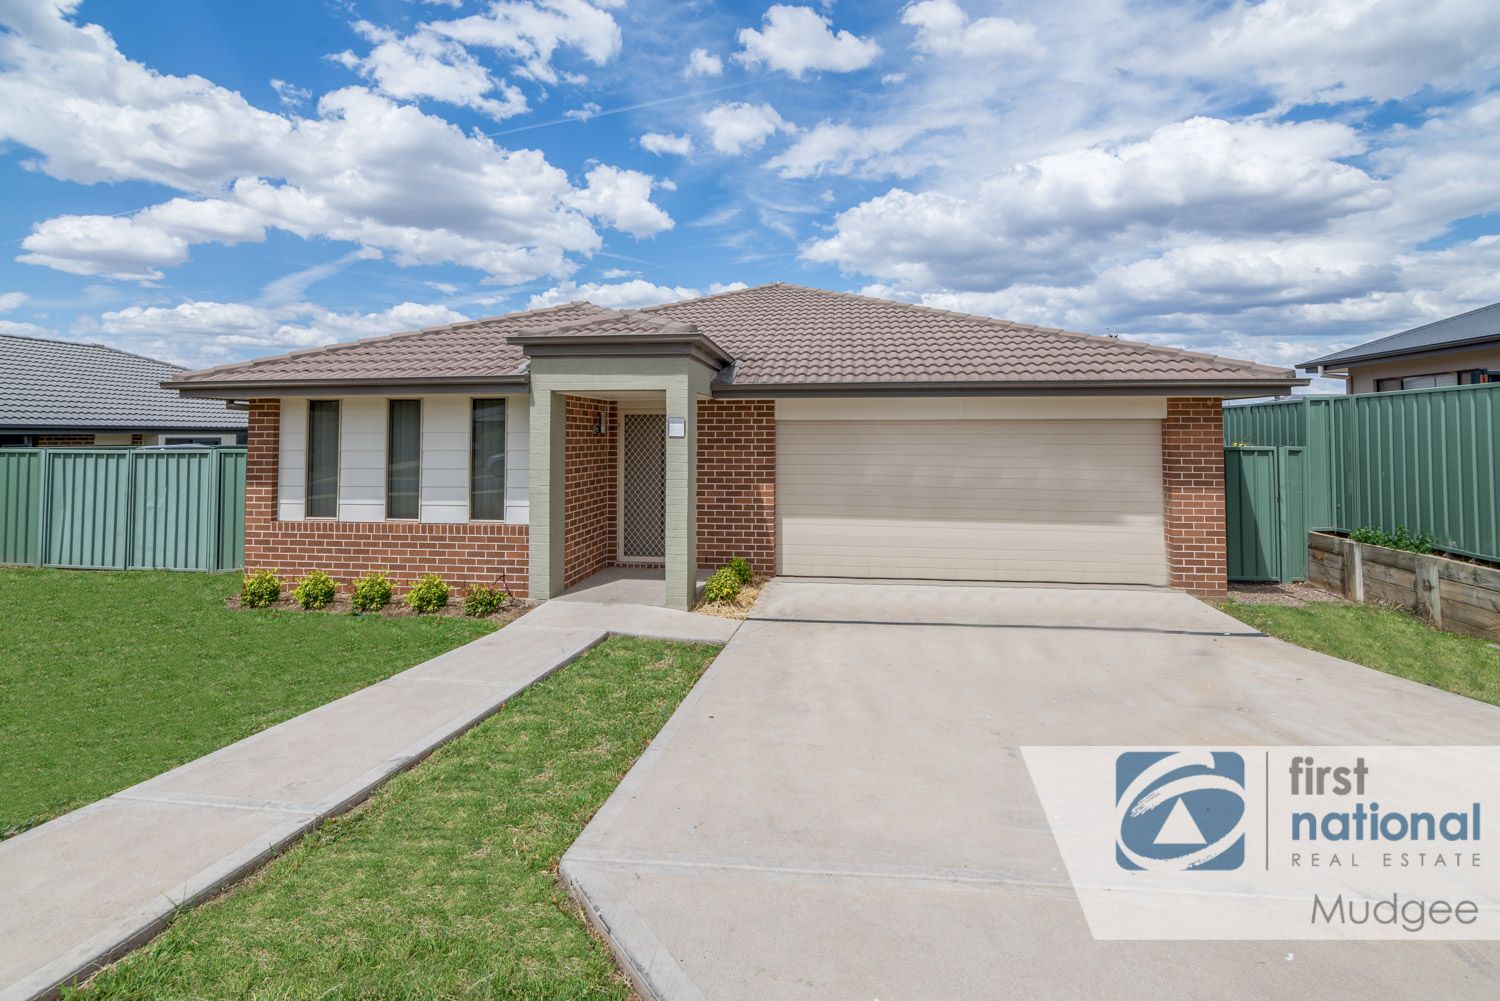 4 bedrooms House in 63 Banjo Paterson Avenue MUDGEE NSW, 2850